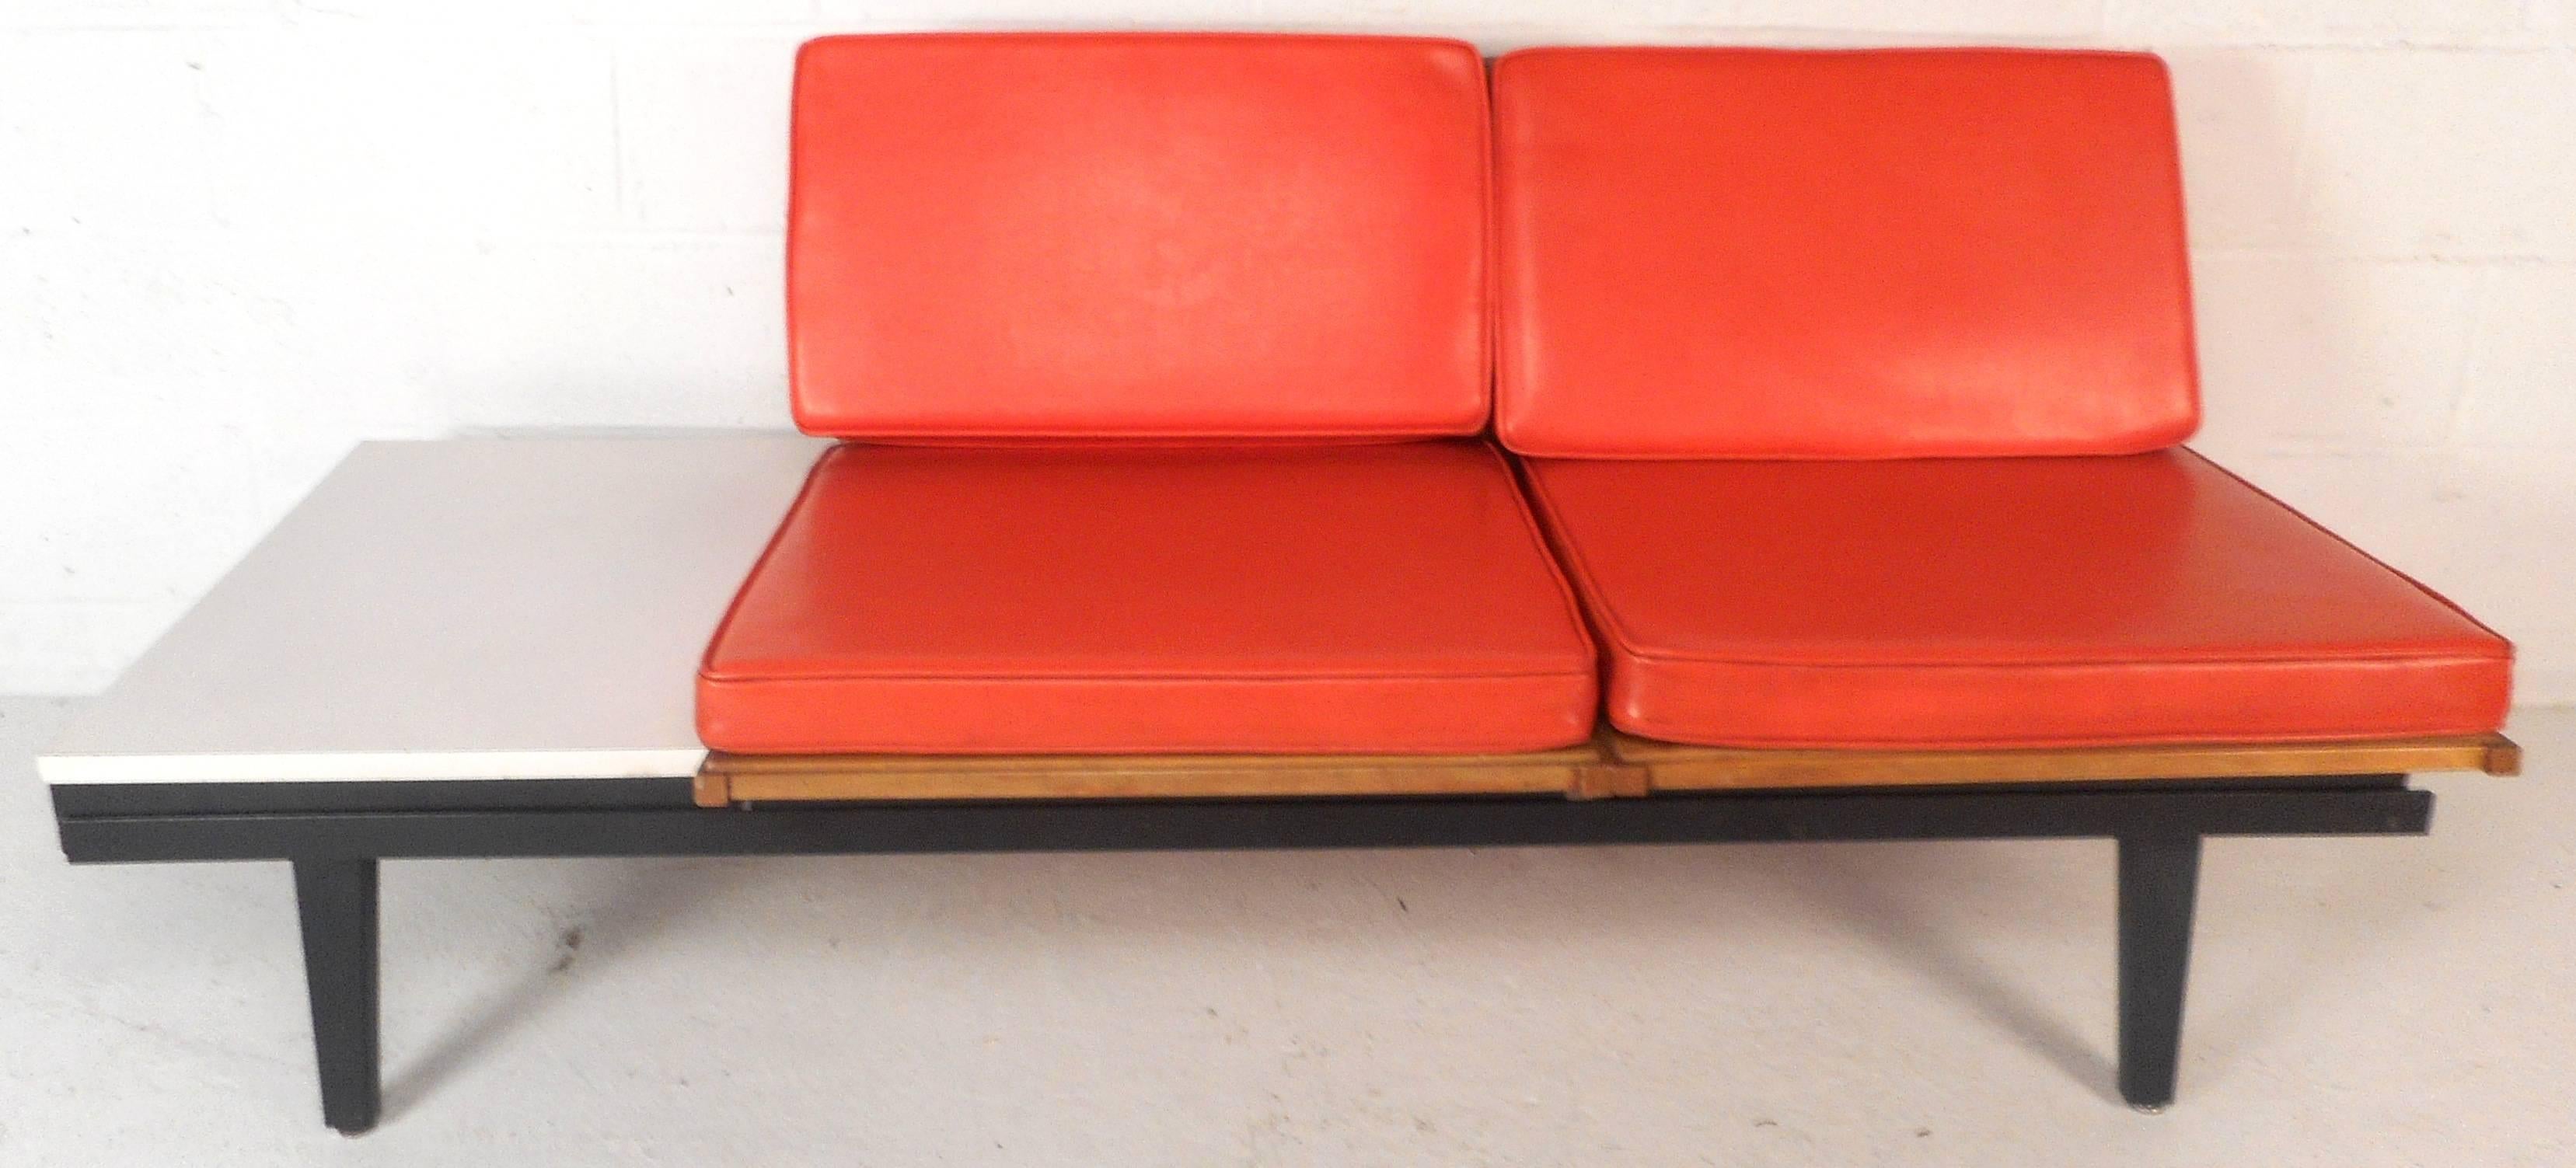 American Mid-Century Modern Lounge Chair Unit and Modular Table by Herman Miller